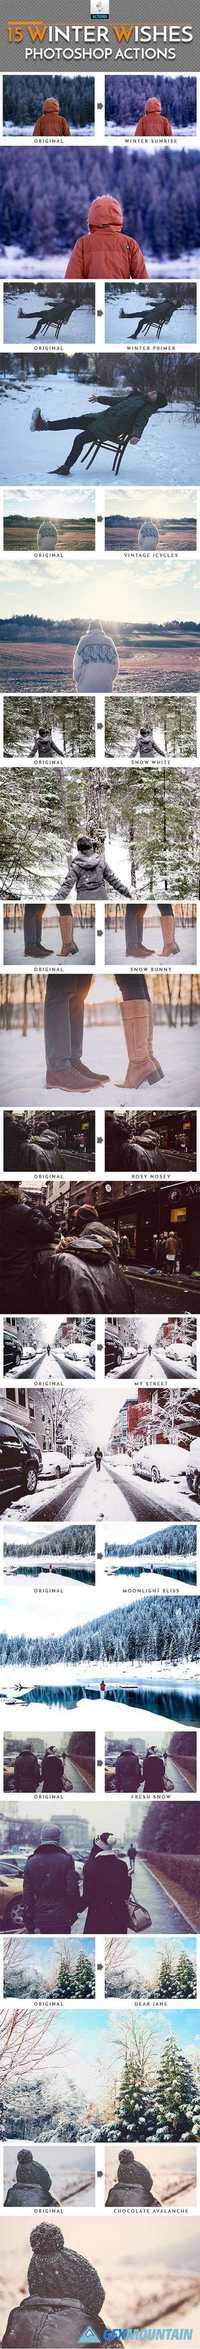 GraphicRiver - 15 Winter Wishes Photoshop Actions 19193002